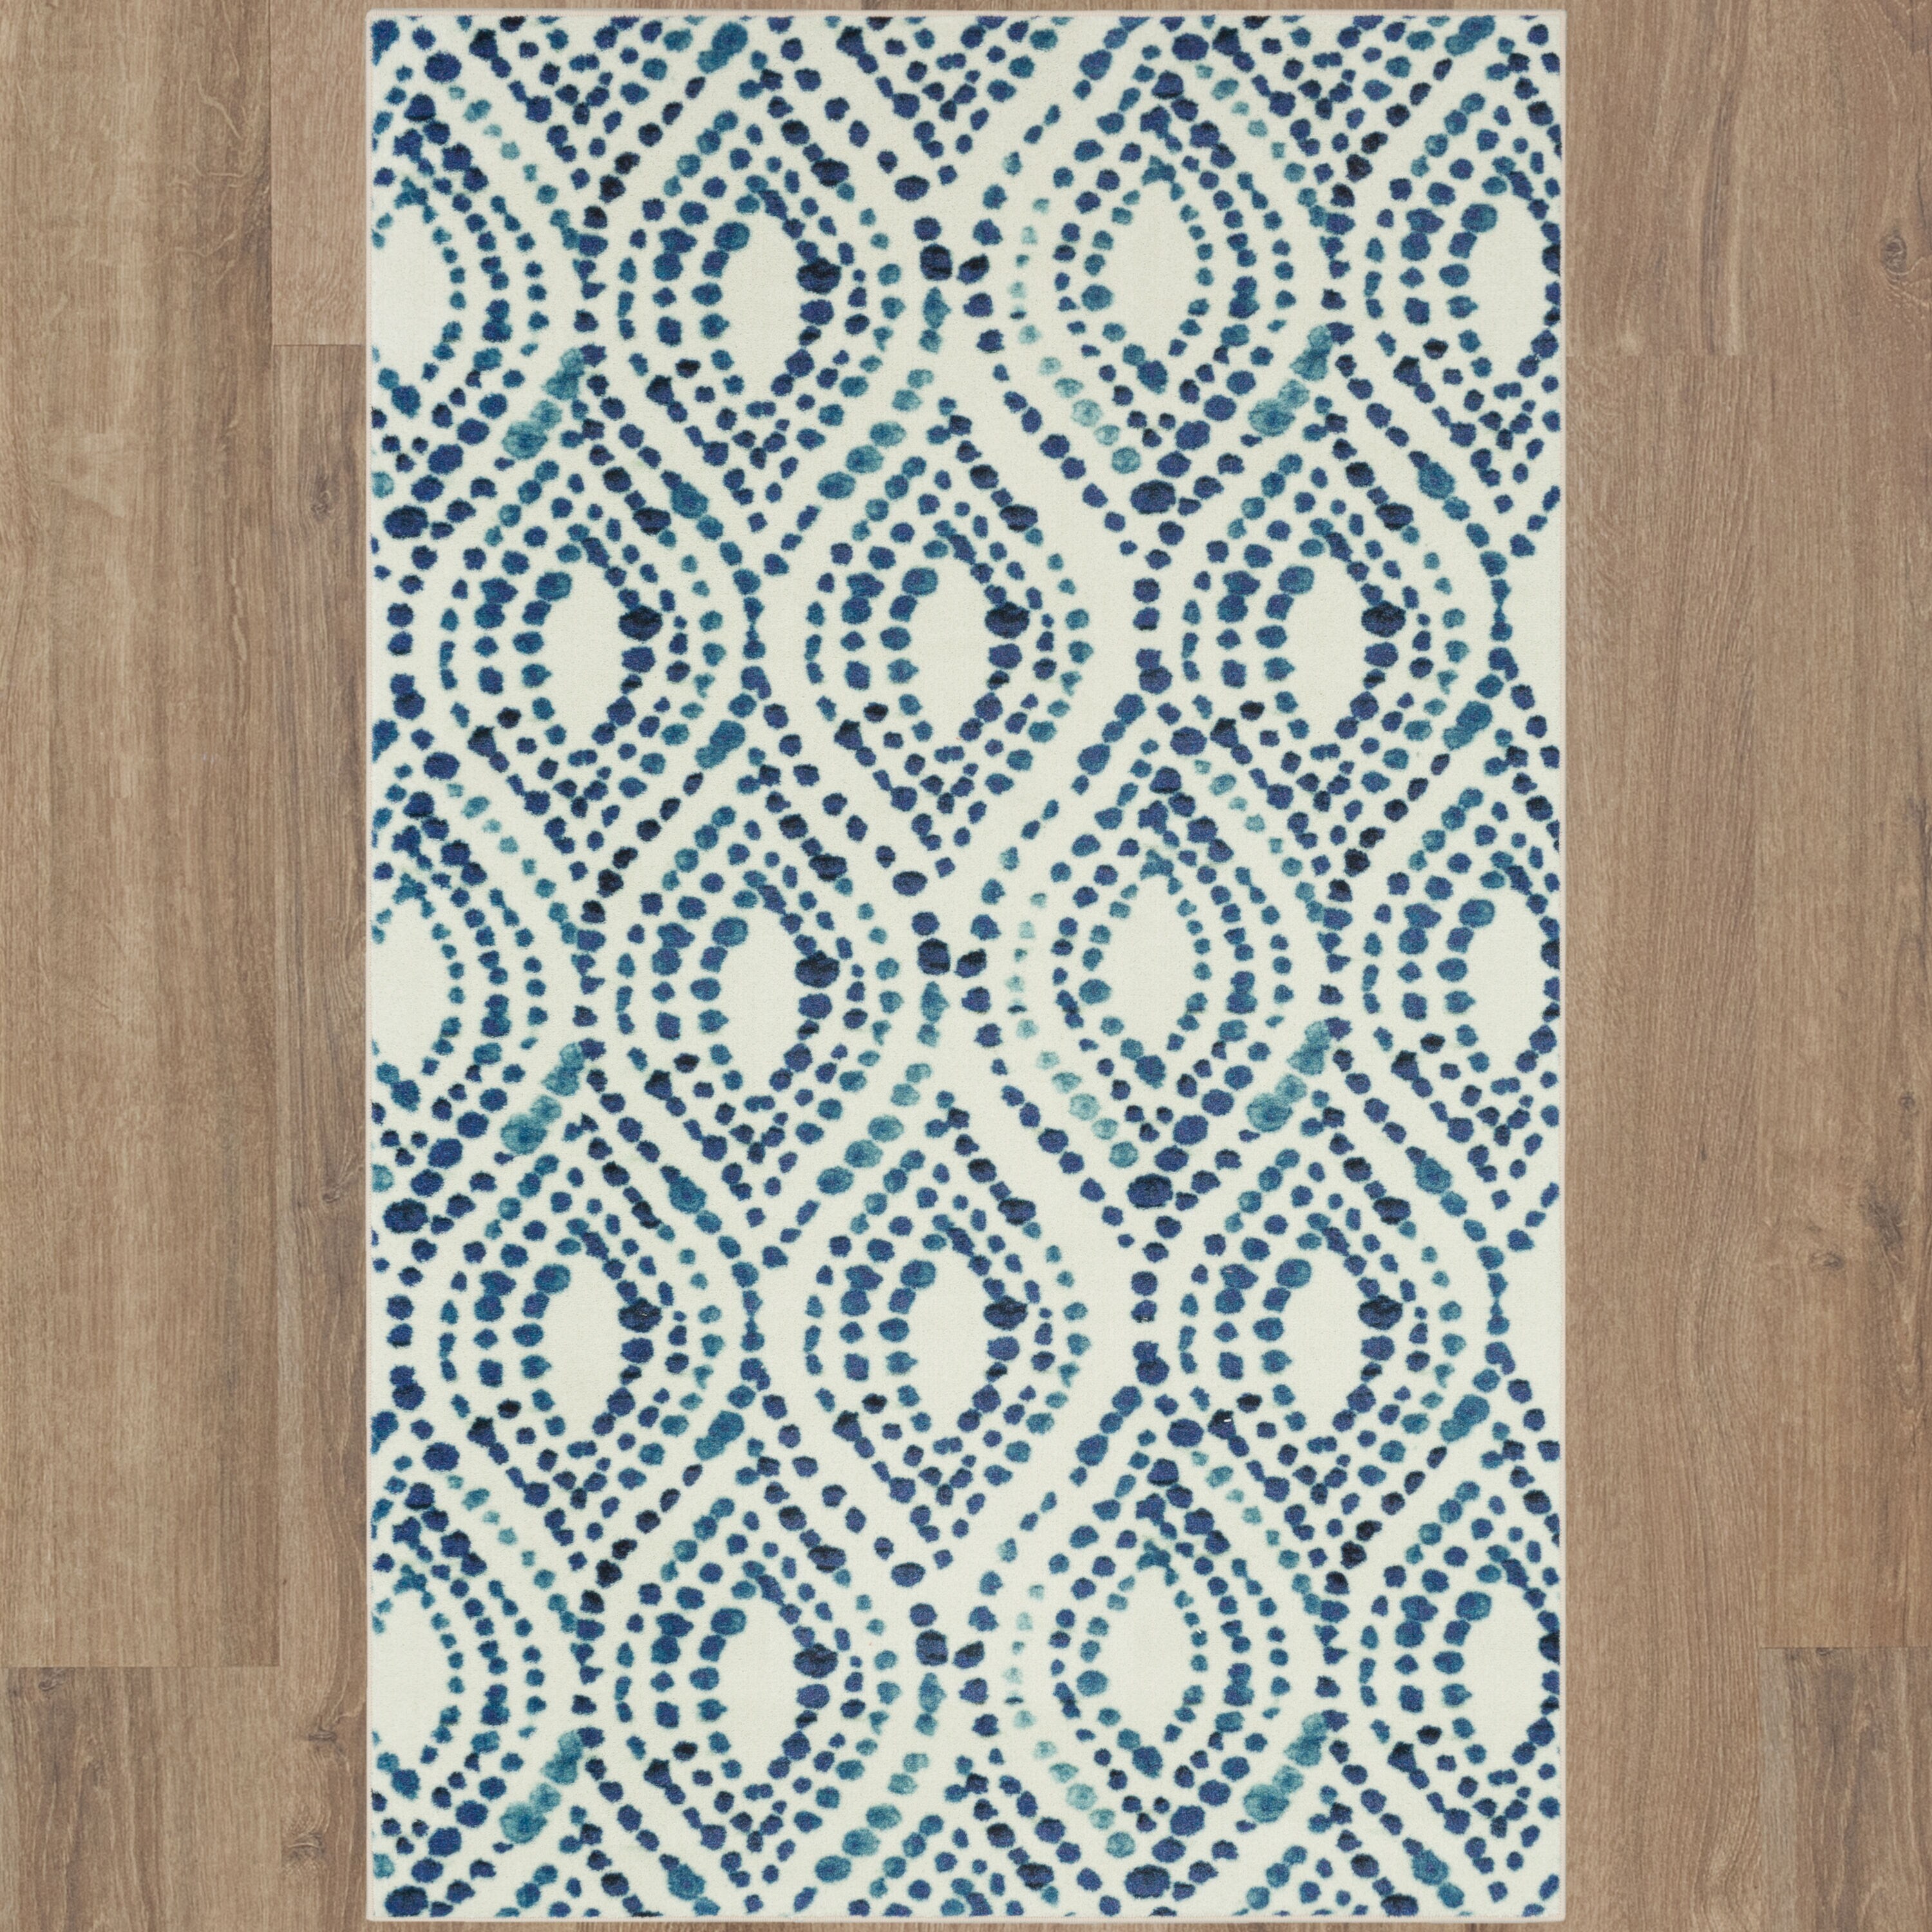 Mohawk Prismatic Dotted Ogee 8' x 10' Area Rug - Navy